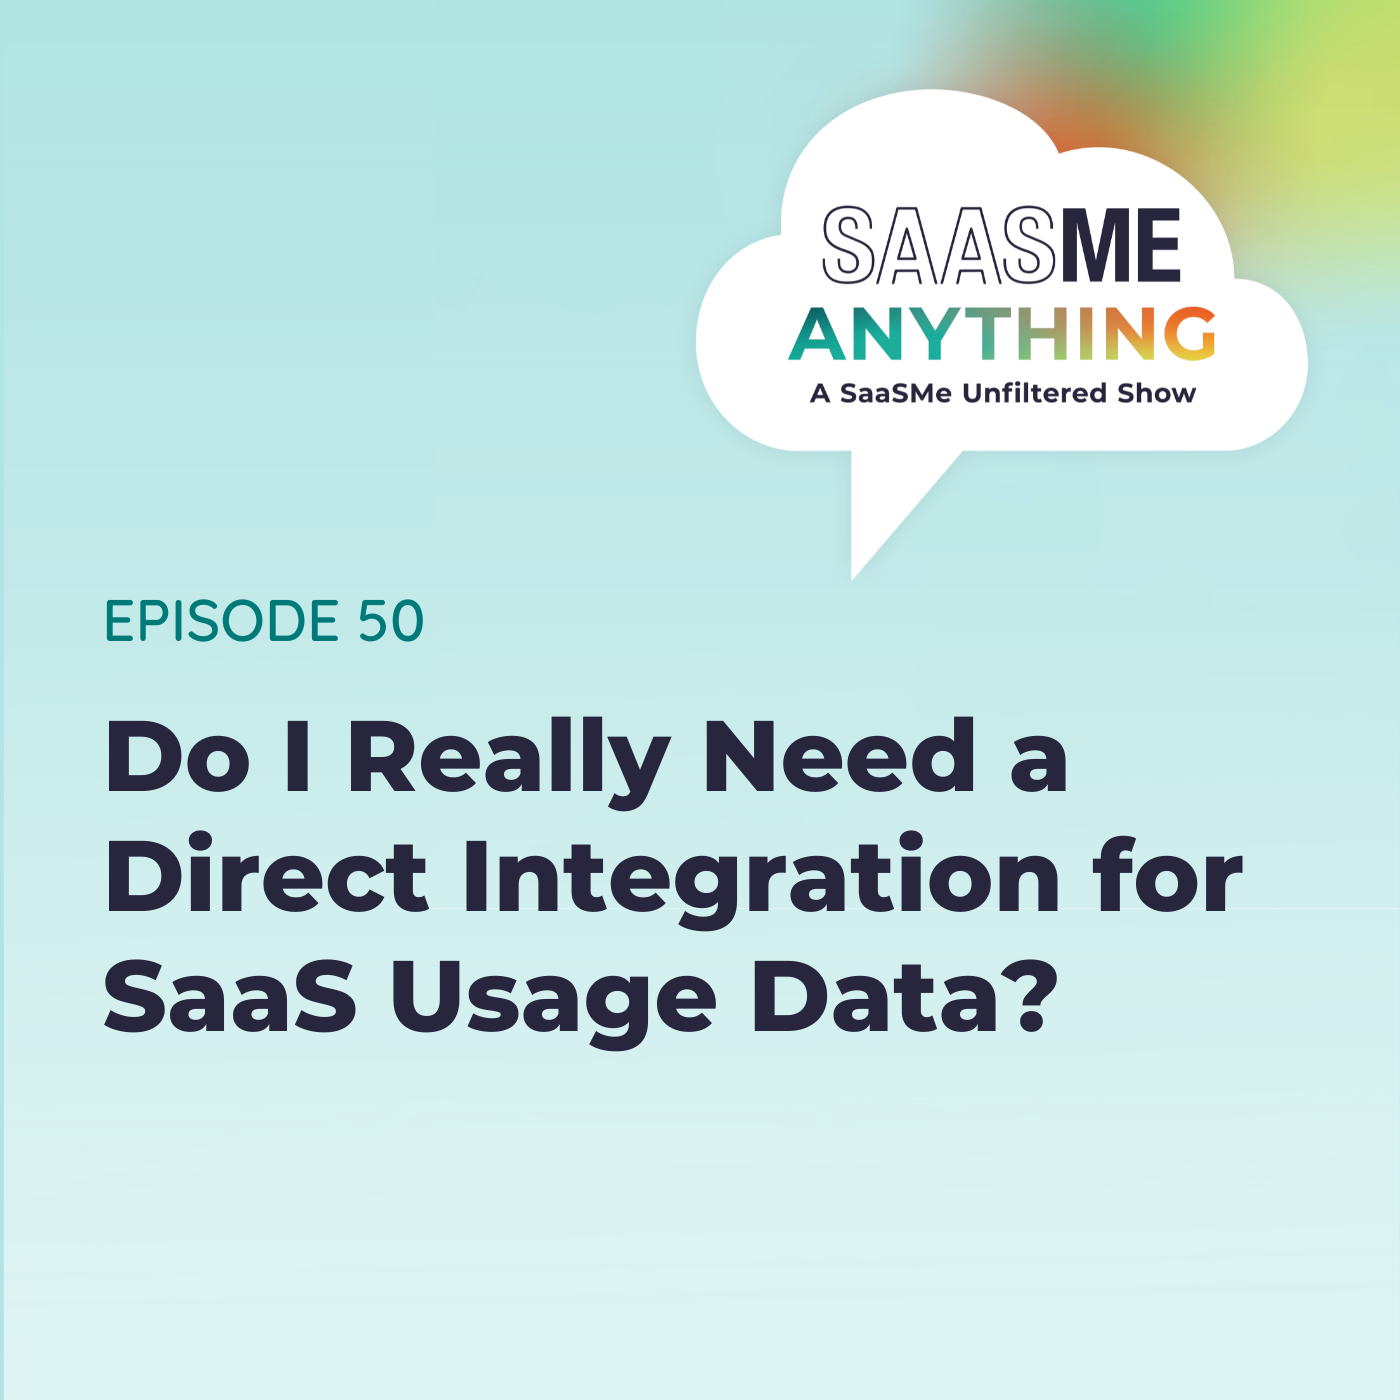 Do I Really Need a Direct Integration for SaaS Usage Data?